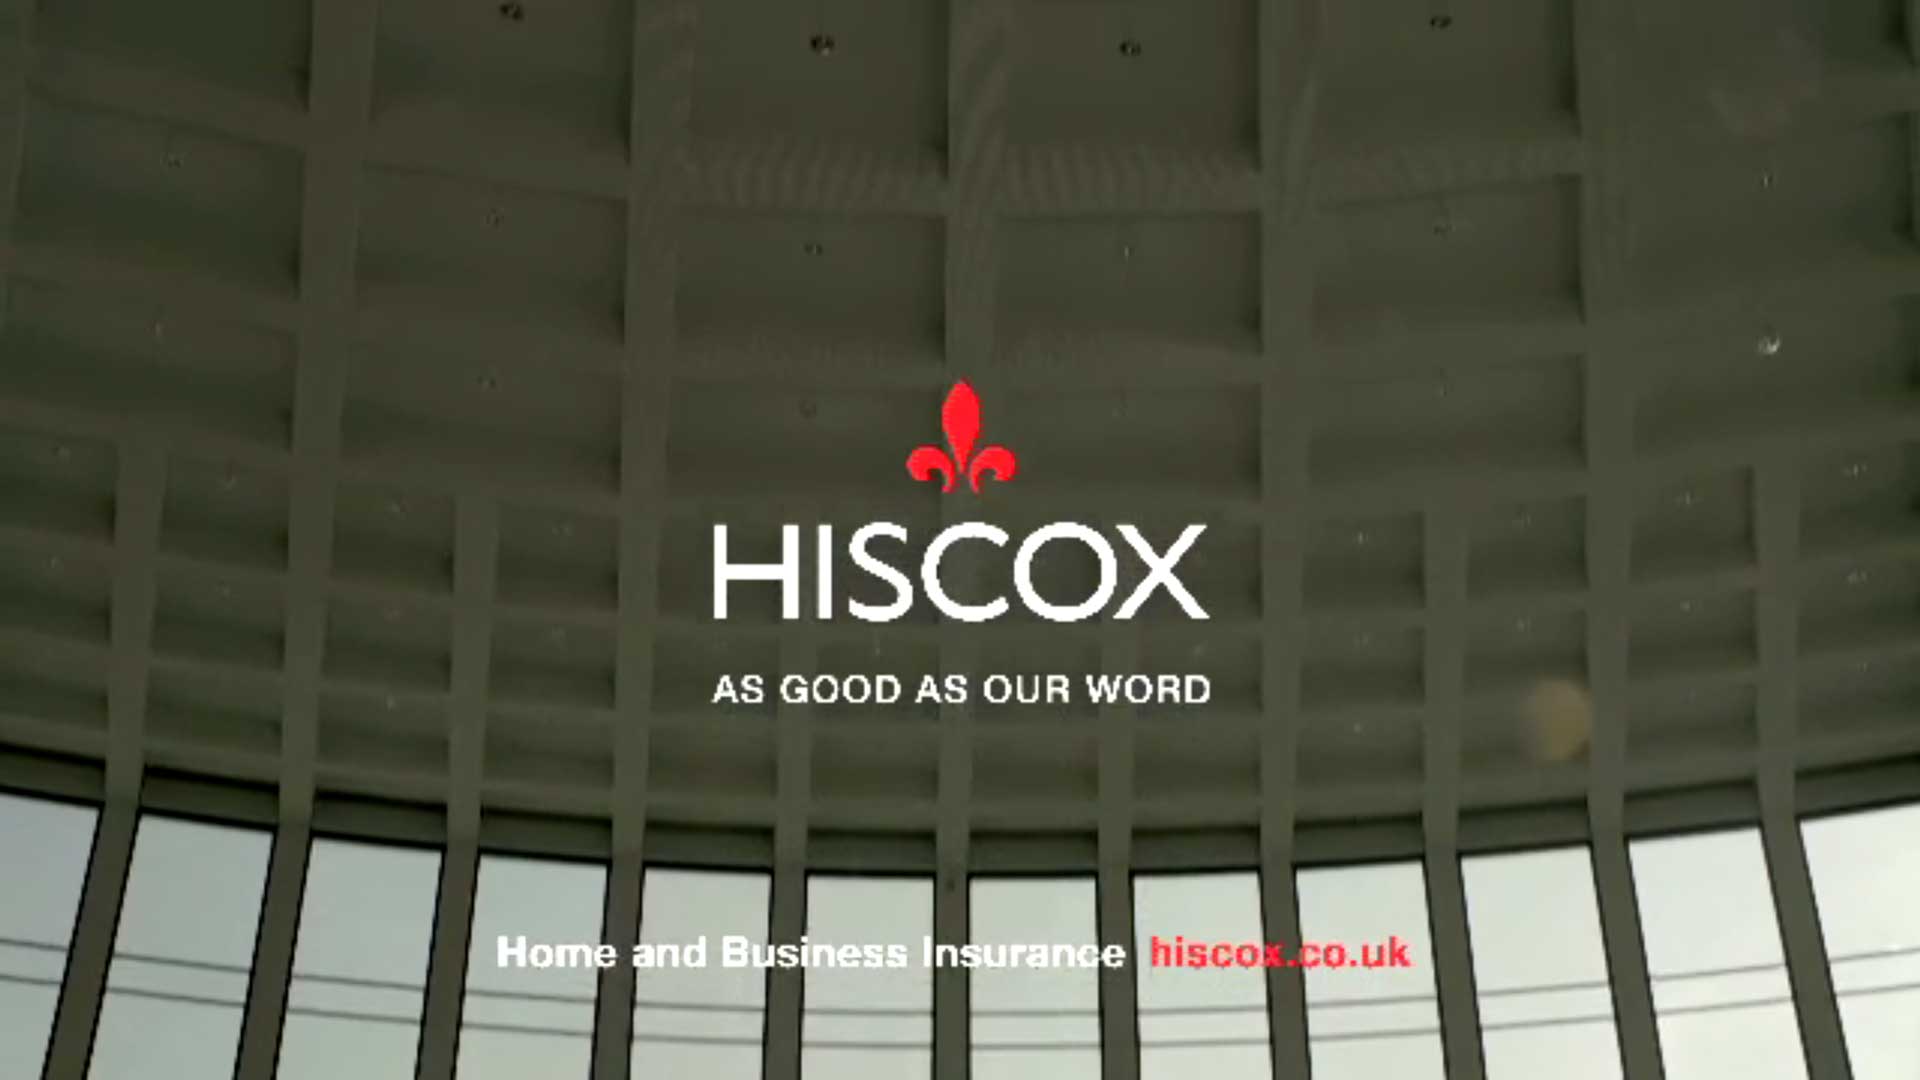 Hiscox - As Good As Our Word